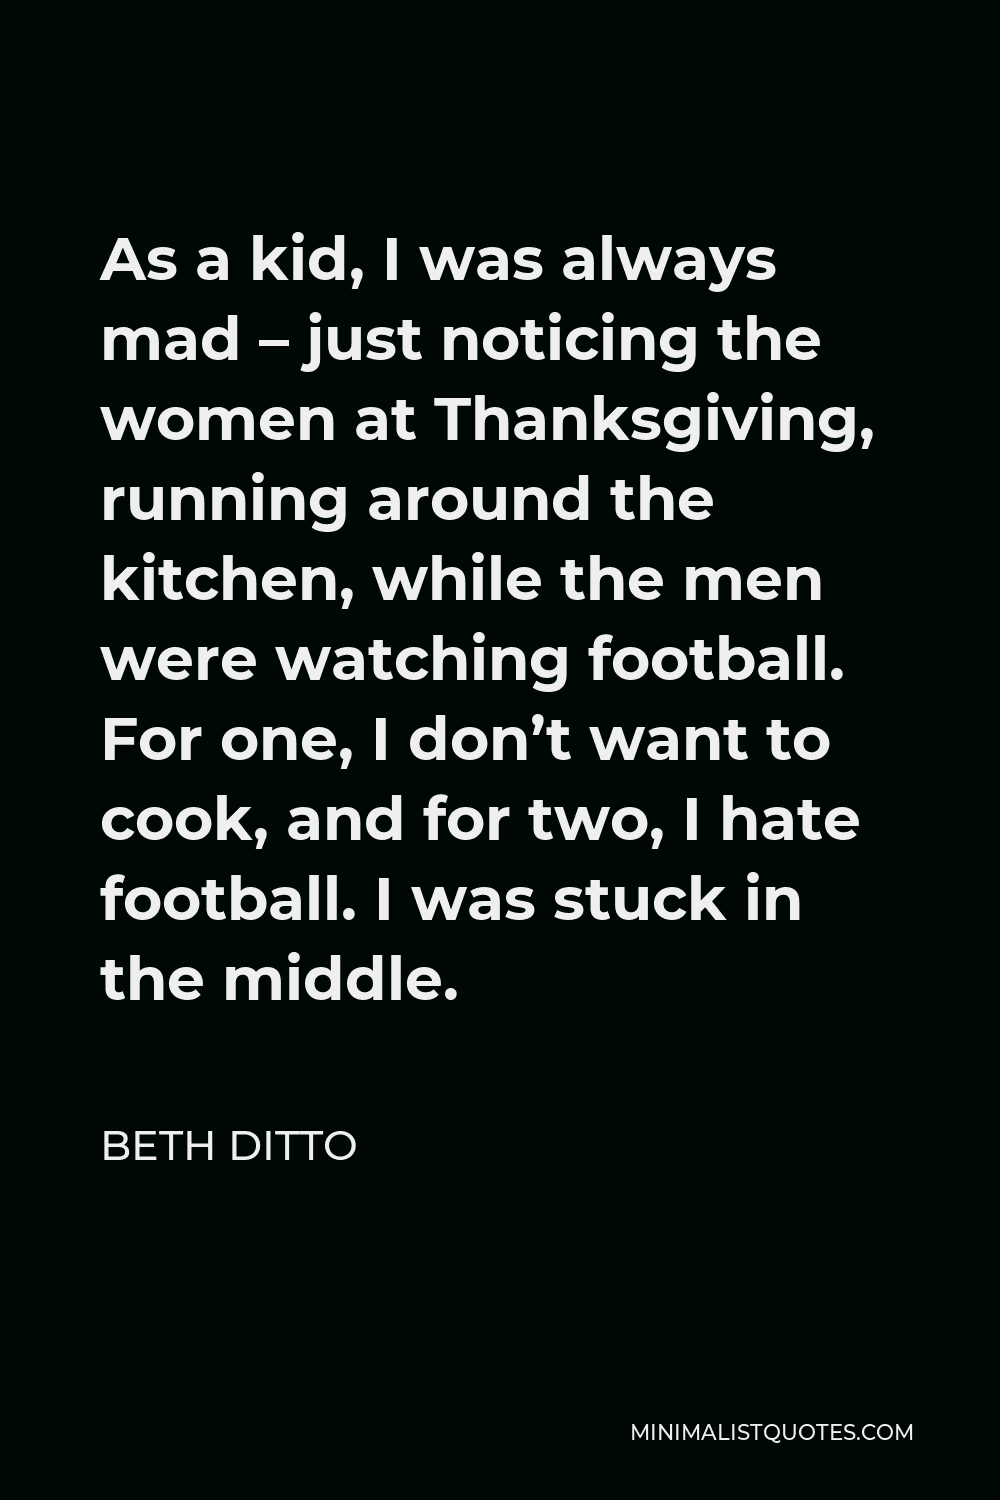 Beth Ditto Quote - As a kid, I was always mad – just noticing the women at Thanksgiving, running around the kitchen, while the men were watching football. For one, I don’t want to cook, and for two, I hate football. I was stuck in the middle.